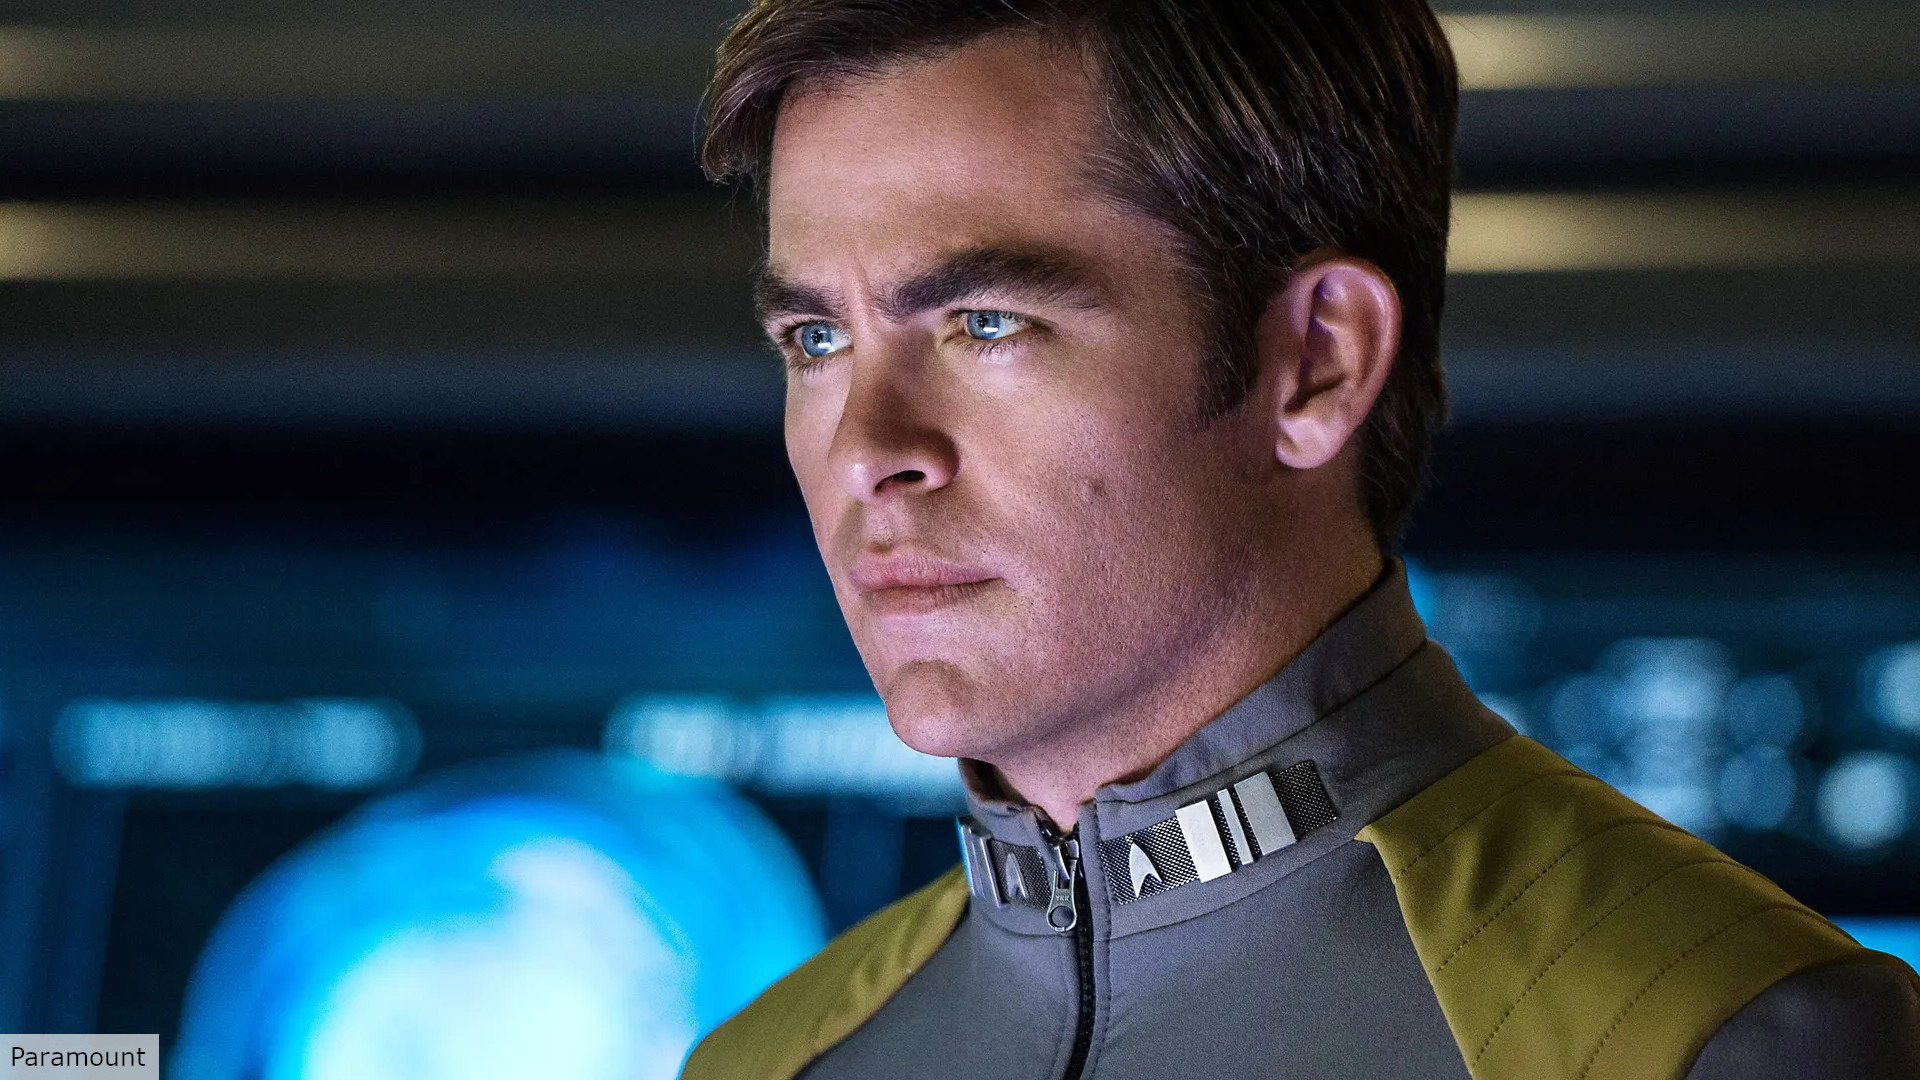 Star Trek 4 release date speculation, cast, plot and more news The